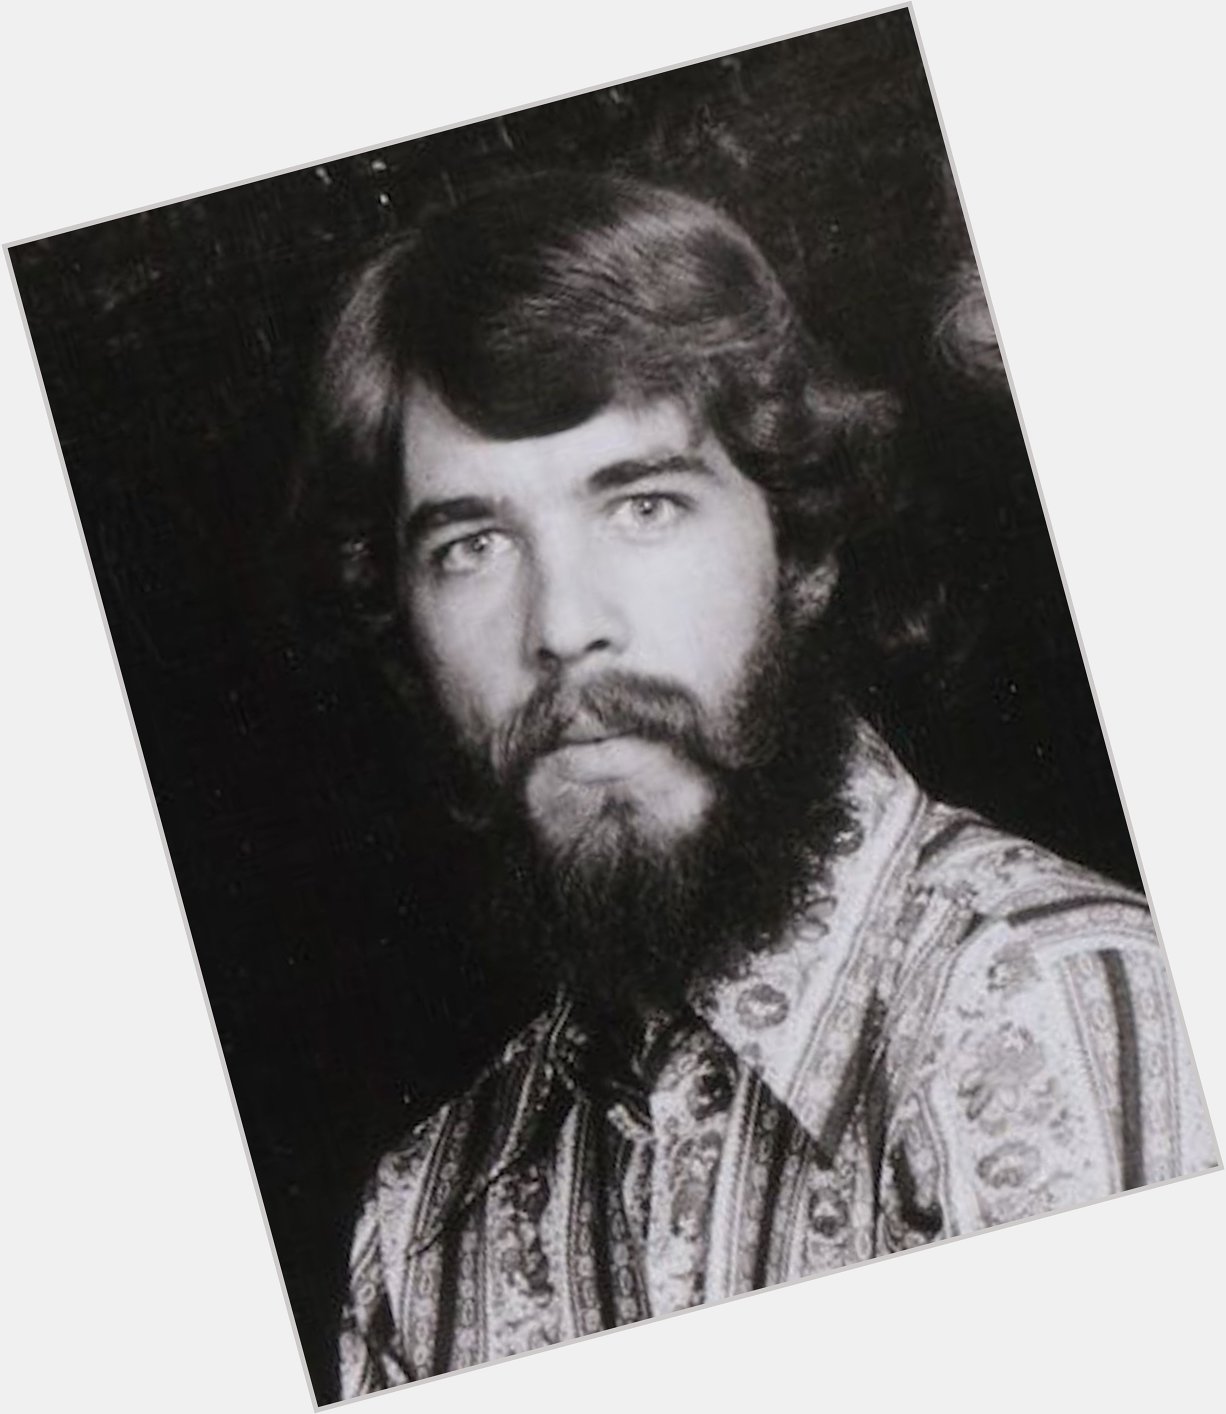 Happy 72nd Birthday Doug Clifford of Creedence Clearwater Revival 